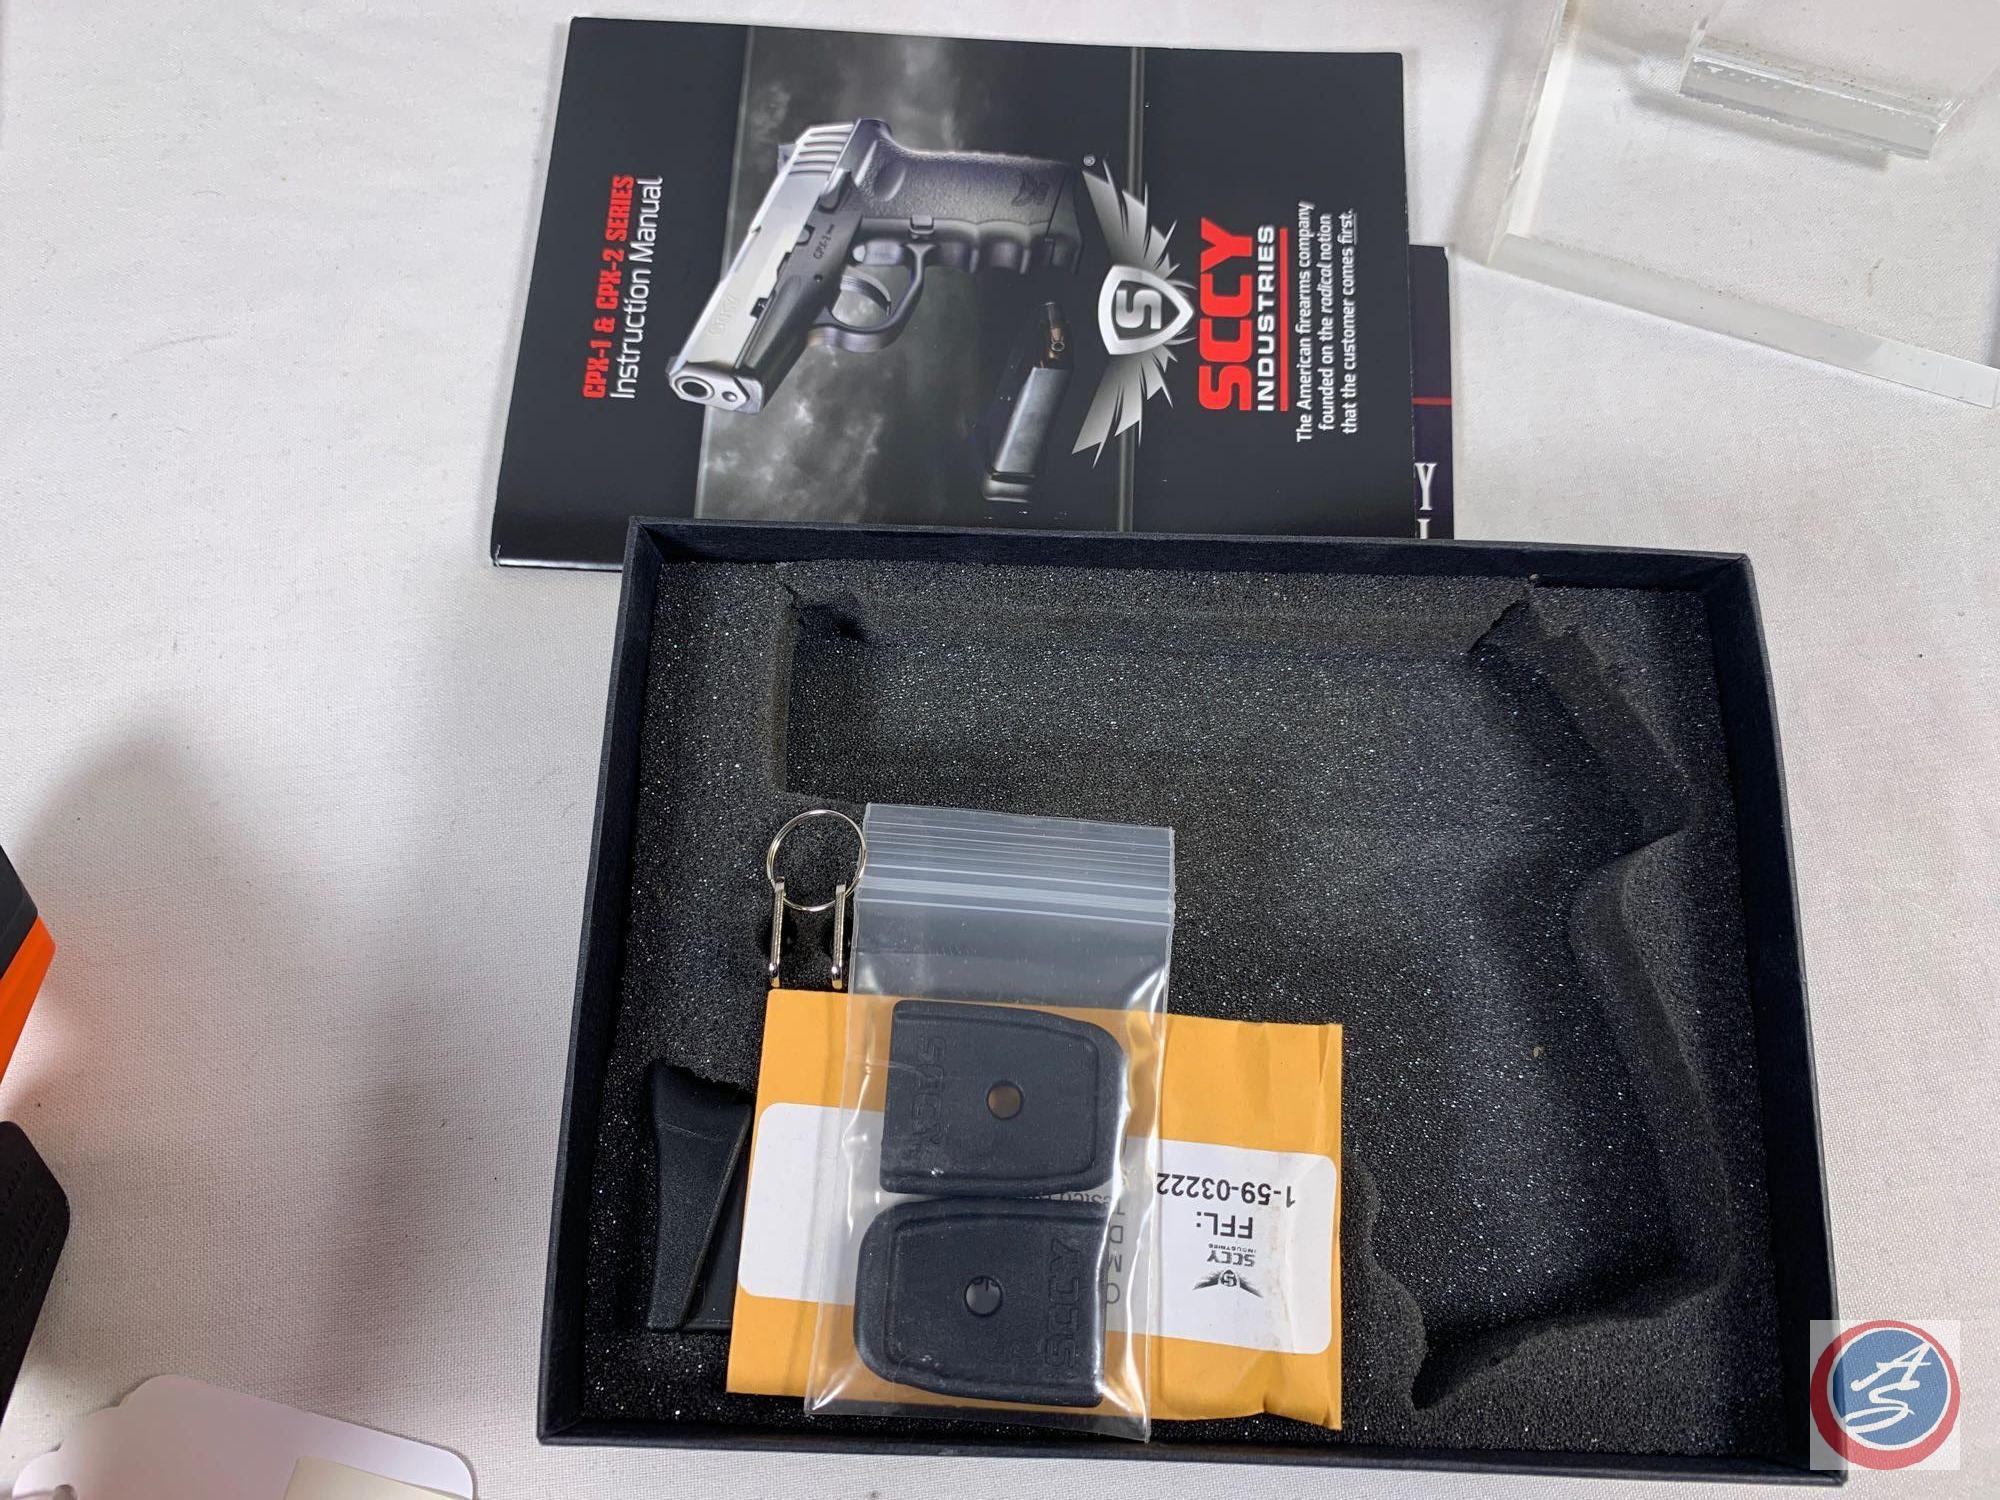 SCCY Model CPX-2 9 X 19 Pistol Semi Auto Pistol as new in factory box with 2 magazines Ser # 361955